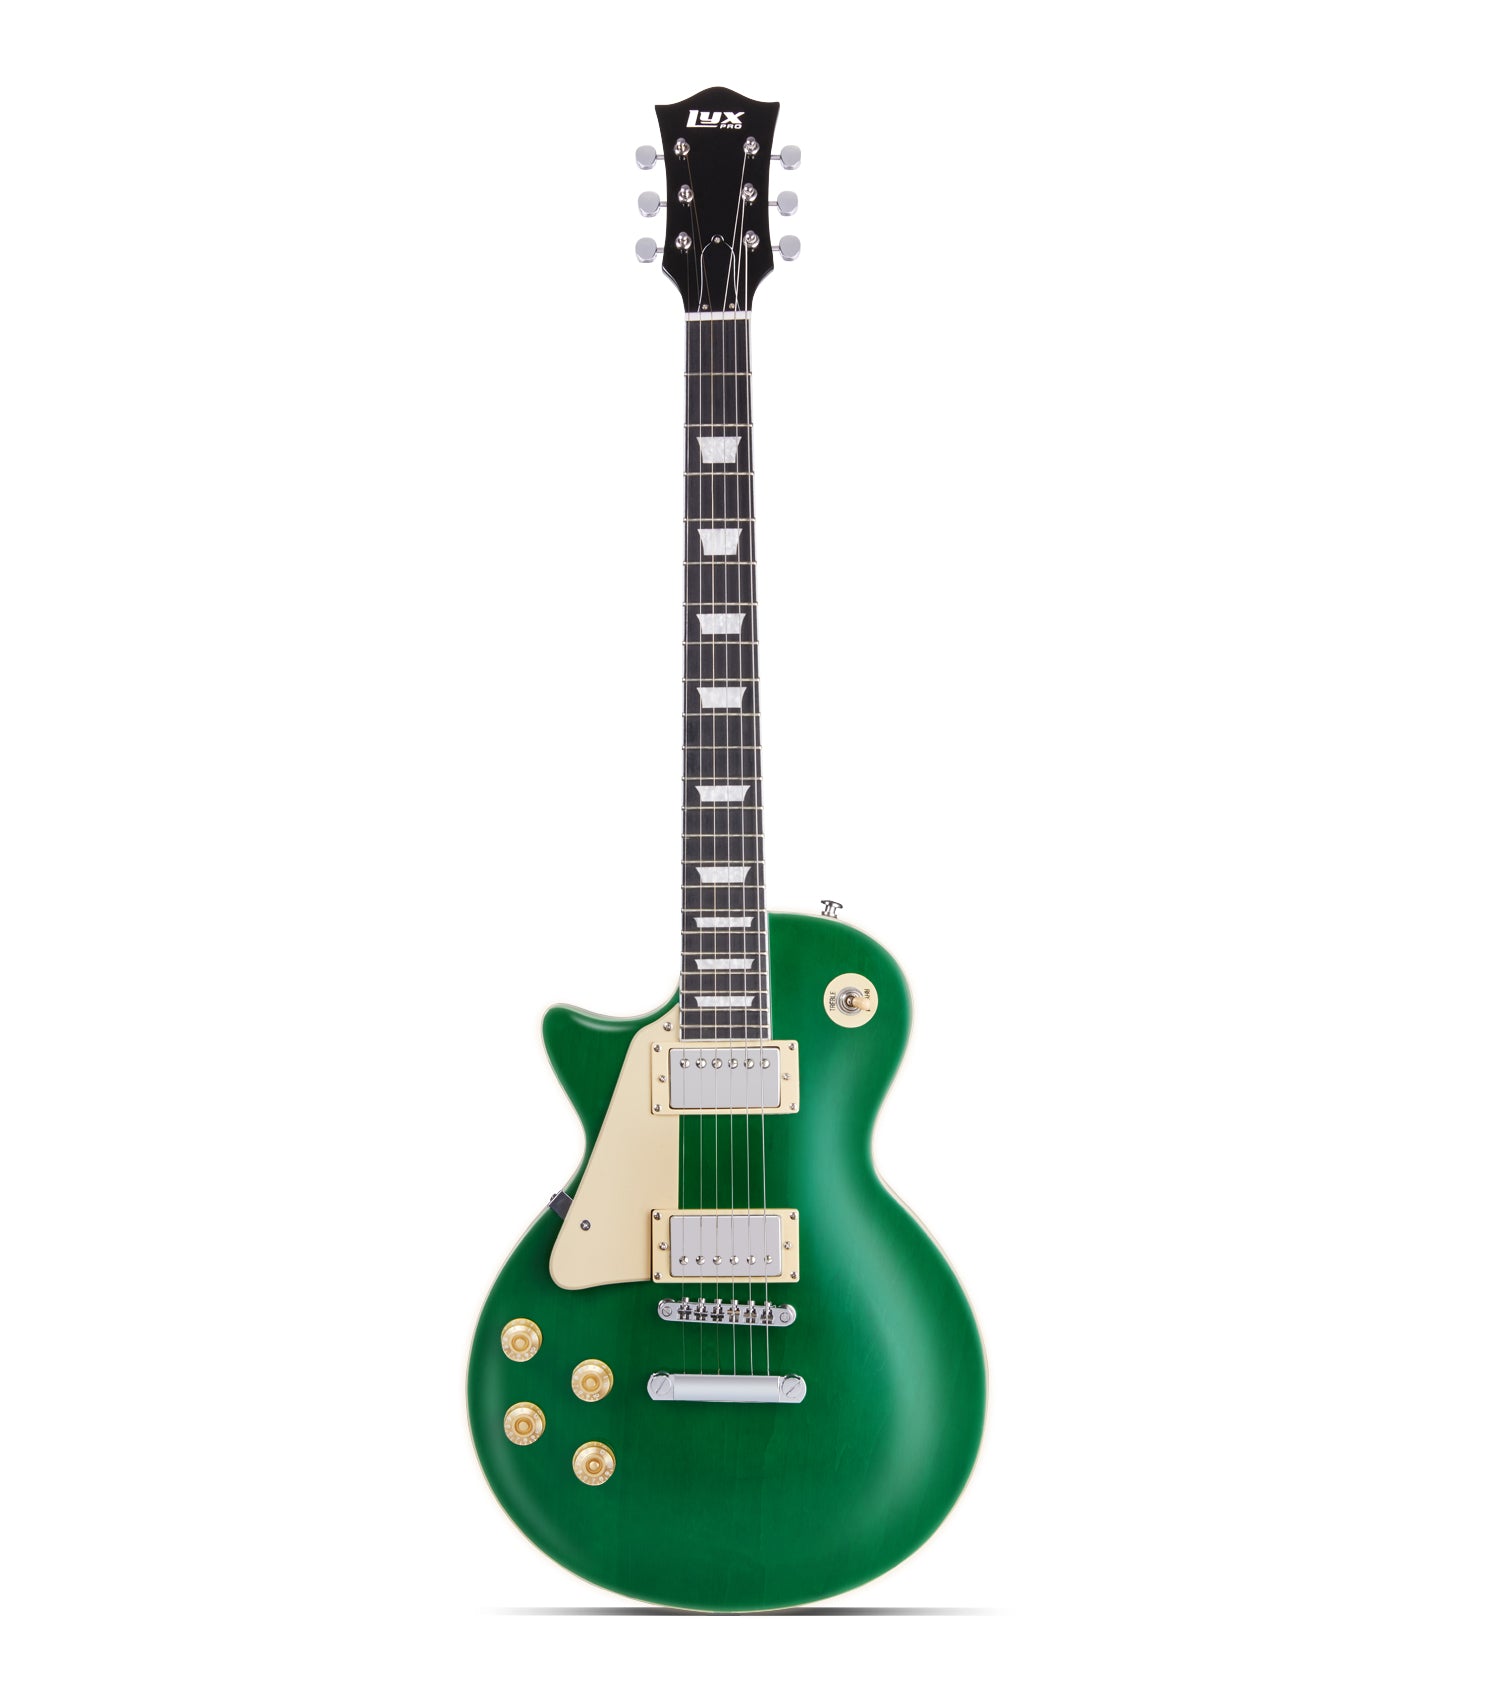 Green Left Handed les paul inspired electric guitar